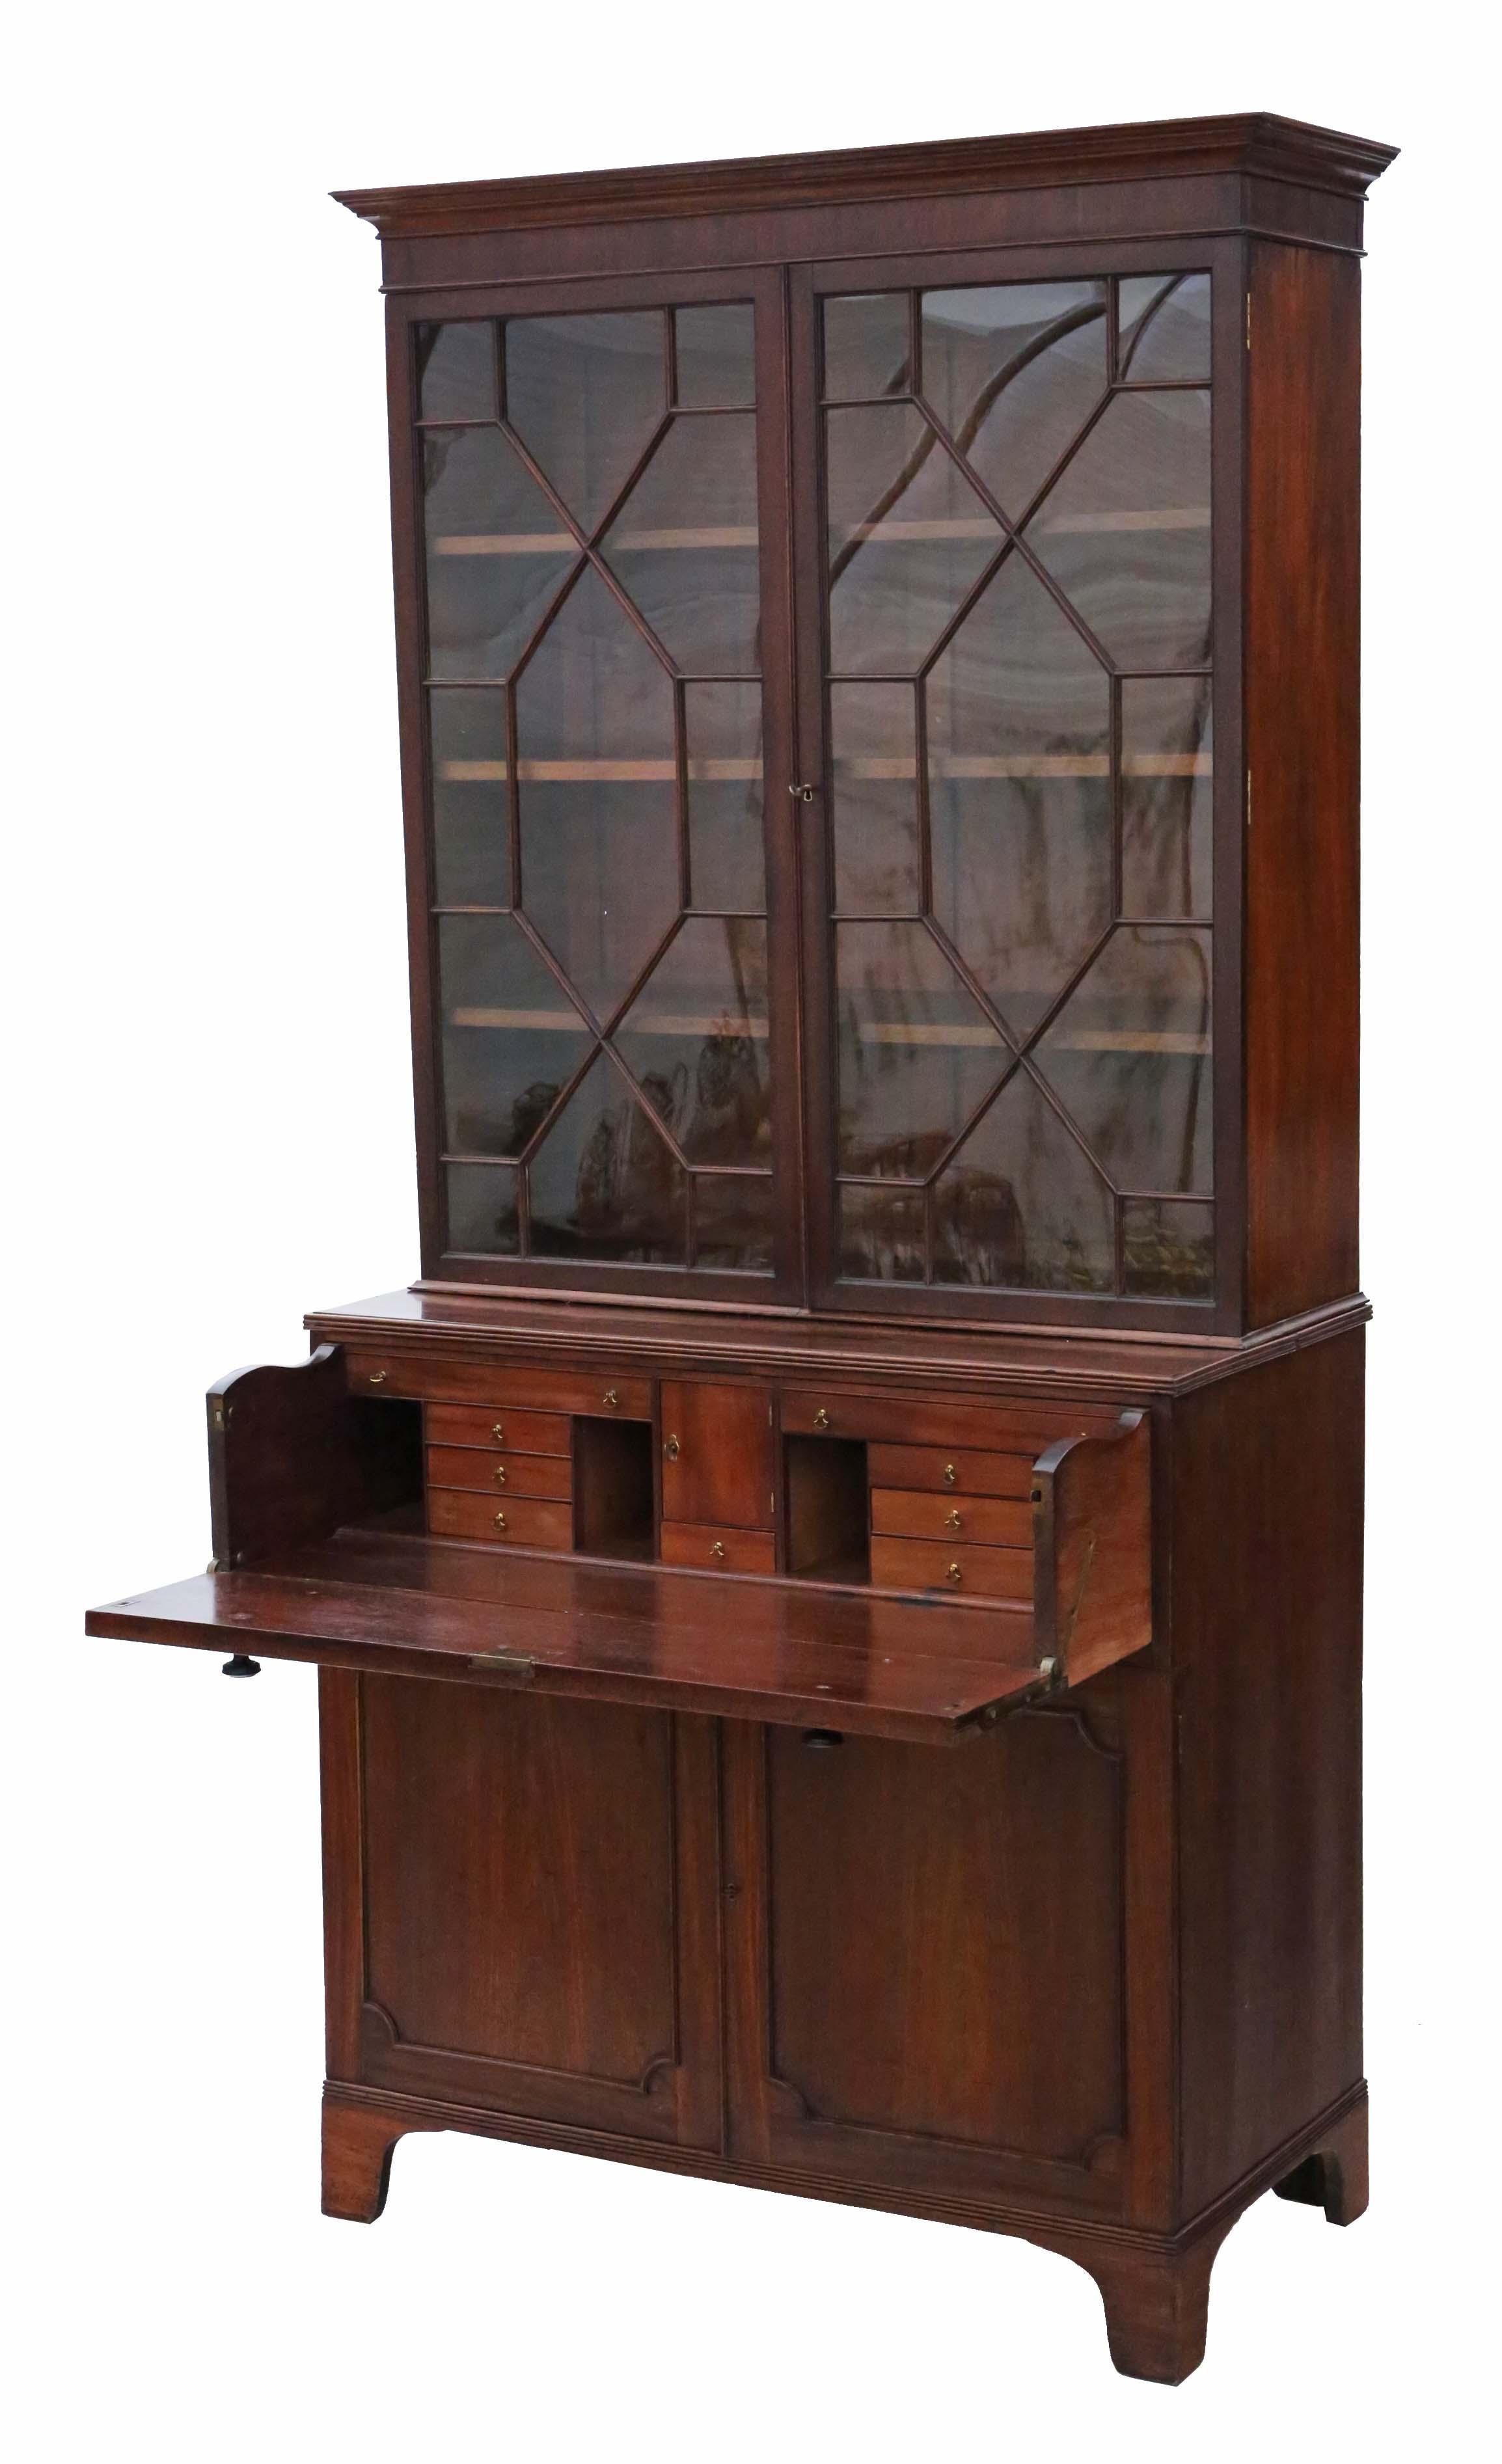 Georgian mahogany secretaire bookcase circa 1800-1830 with built in desk / writing table. We have keys.
This is a lovely quality item, that is full of age, charm and character. A very decorative piece that a tremendous amount of work went